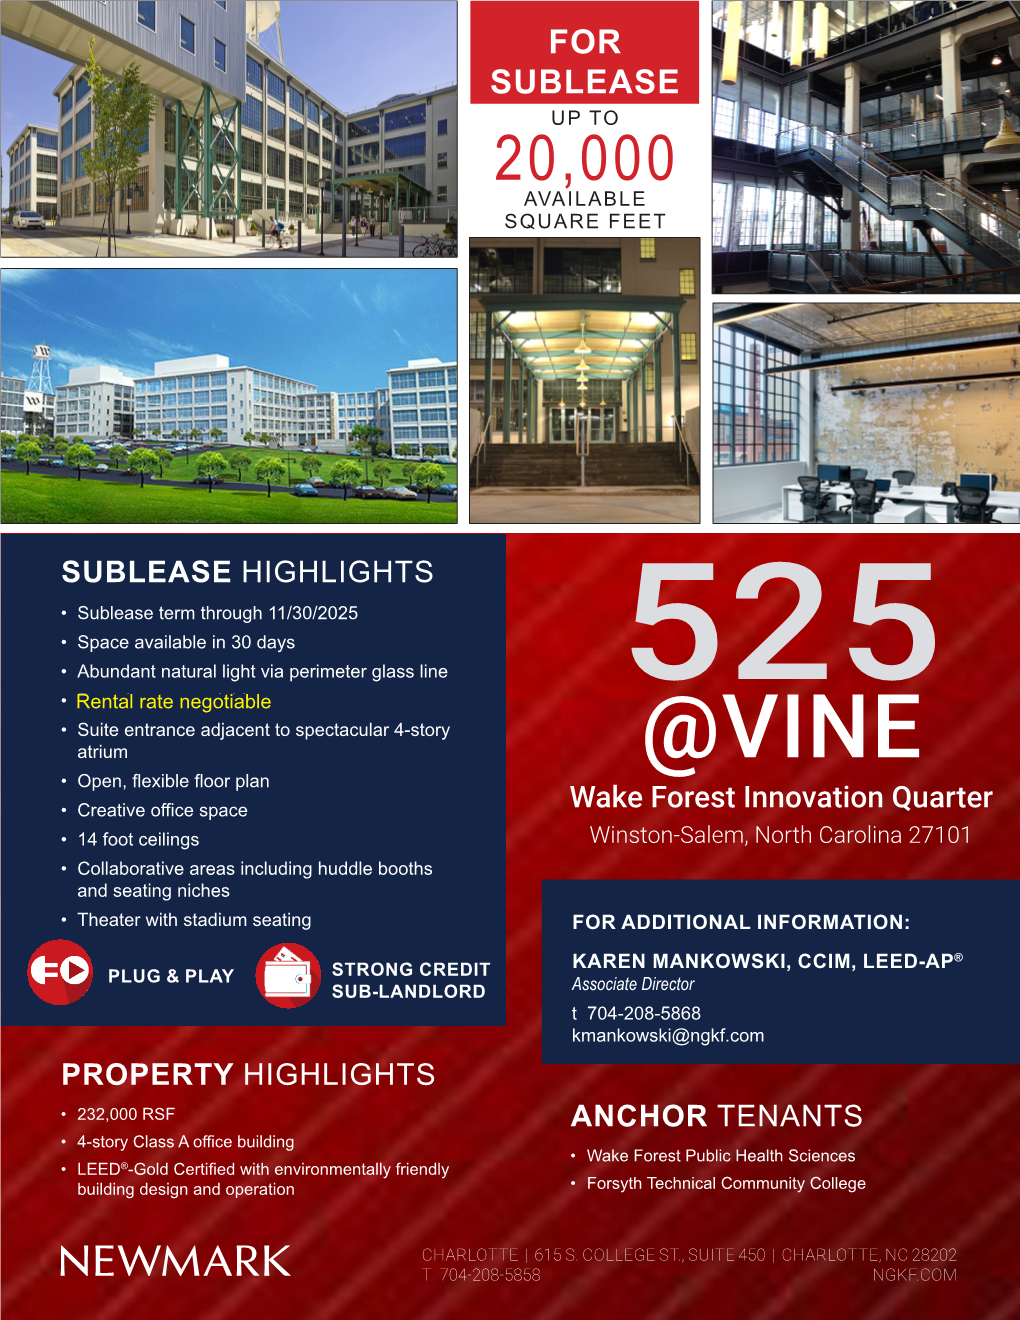 For Sublease up to 20,000 Available Square Feet